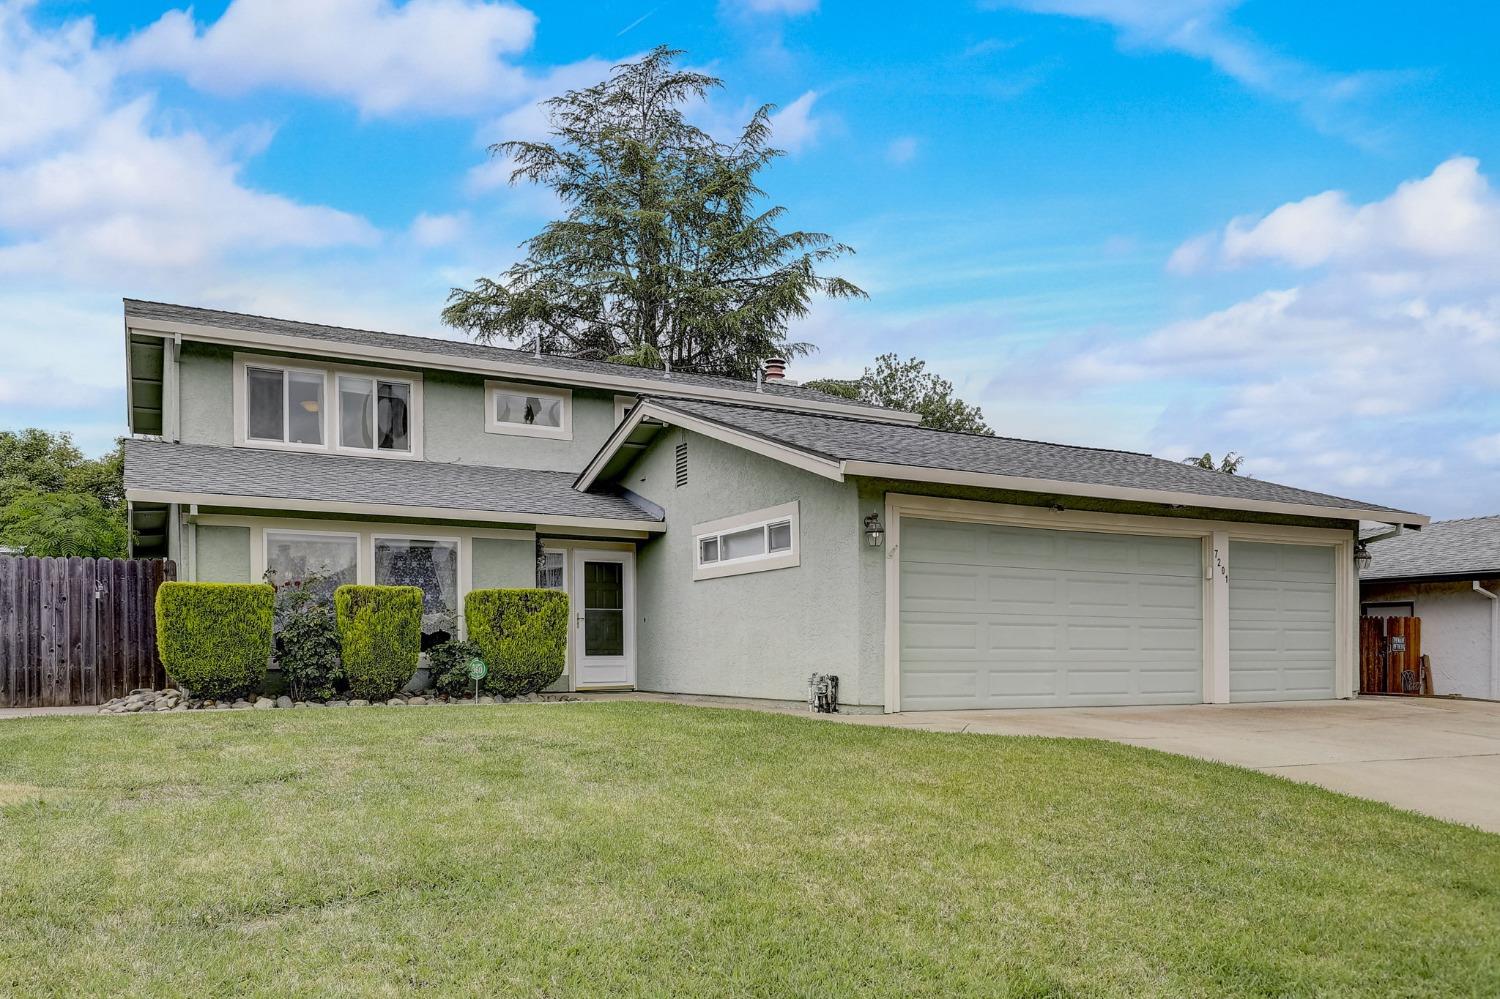 Photo of 7201 Geowood Wy in Citrus Heights, CA